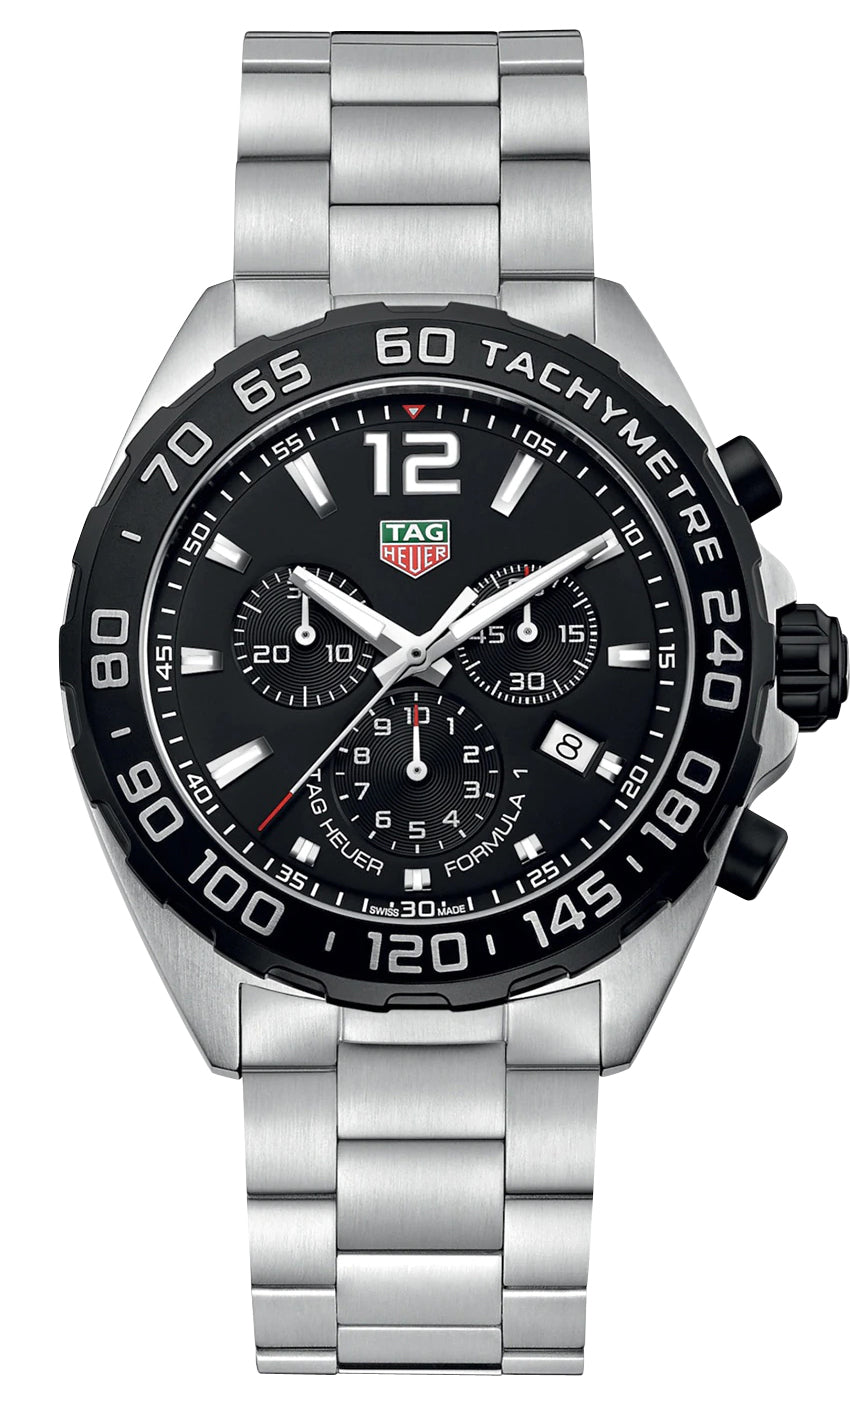 update alt-text with template Watches - Mens-Tag Heuer-CAZ1010.BA0842-40 - 45 mm, black, chronograph, date, divers, Formula 1, mens, menswatches, new arrivals, product_ContactUs, round, seconds sub-dial, stainless steel band, stainless steel case, swiss quartz, tachymeter, TAG Heuer, watches-Watches & Beyond